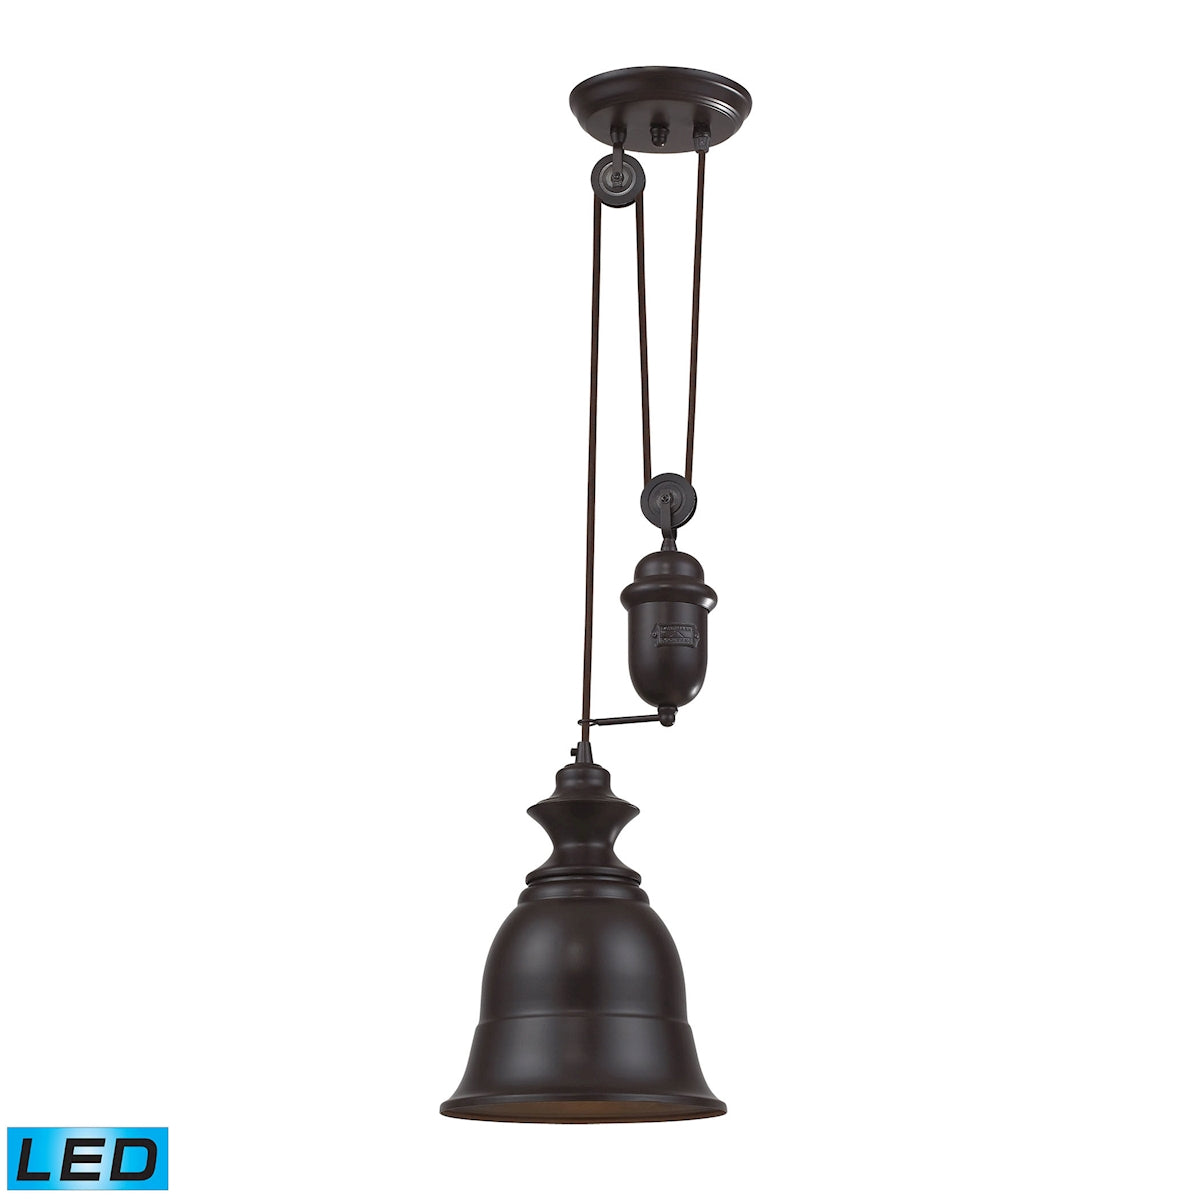 ELK Lighting 65070-1-LED Farmhouse 1-Light Adjustable Pendant in Oiled Bronze with Matching Shade - Includes LED Bulb